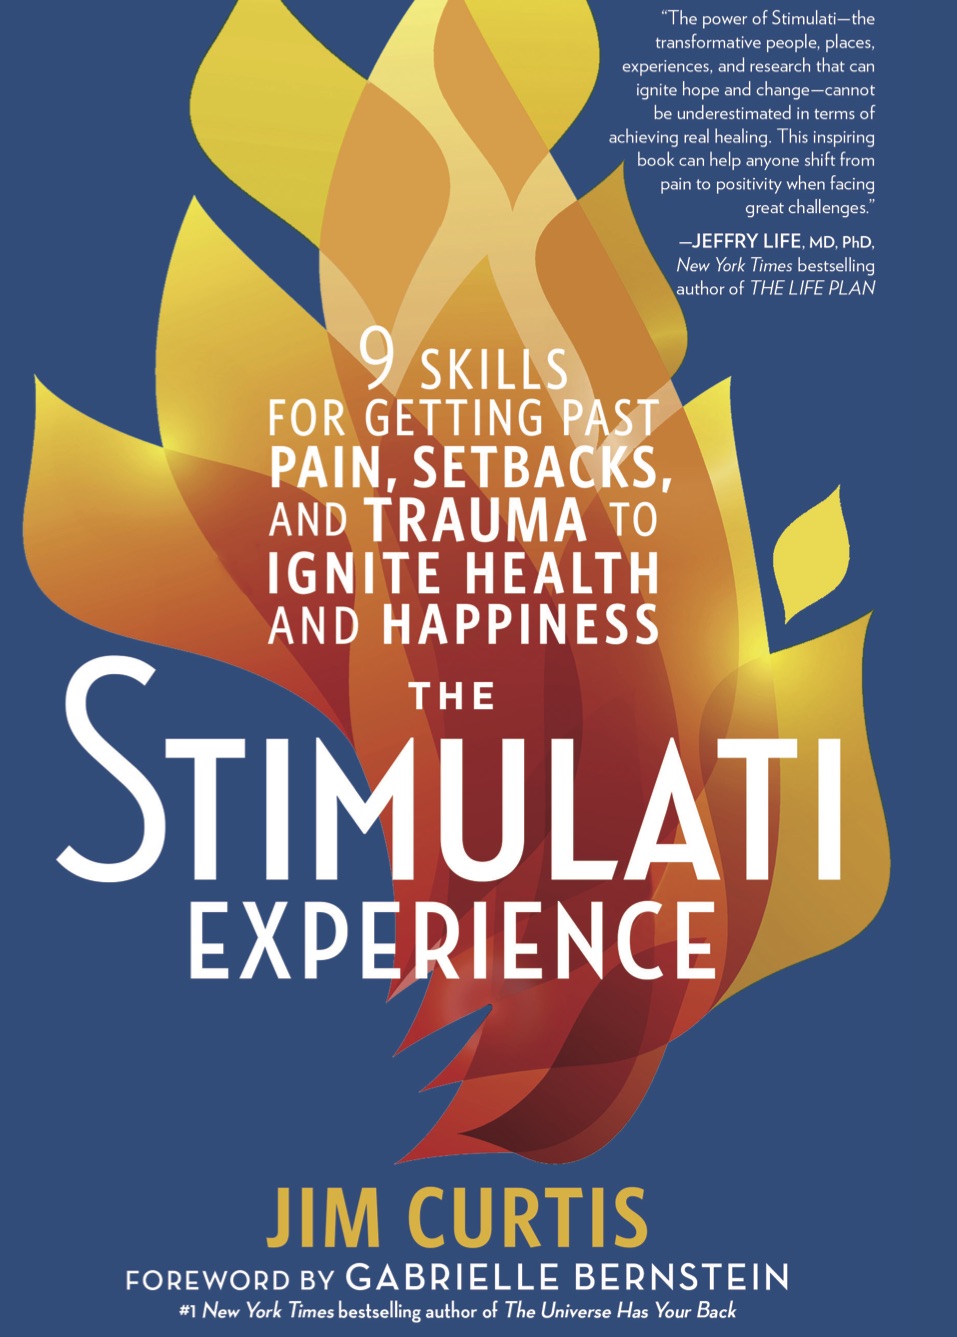 Book Launch: The Stimulati Experience by Jim Curtis